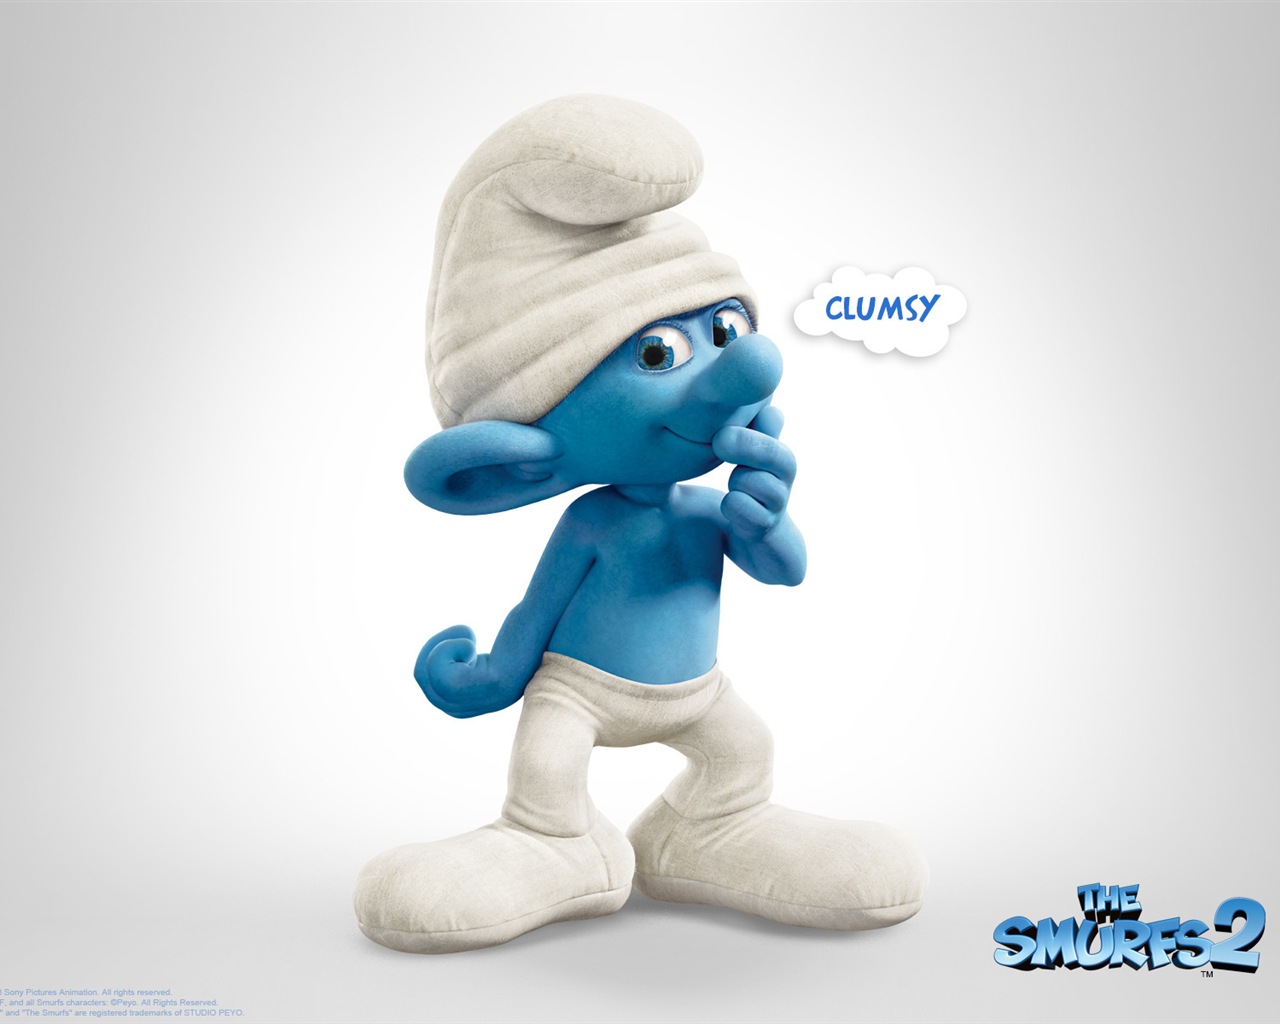 The Smurfs 2 HD movie wallpapers #8 - 1280x1024